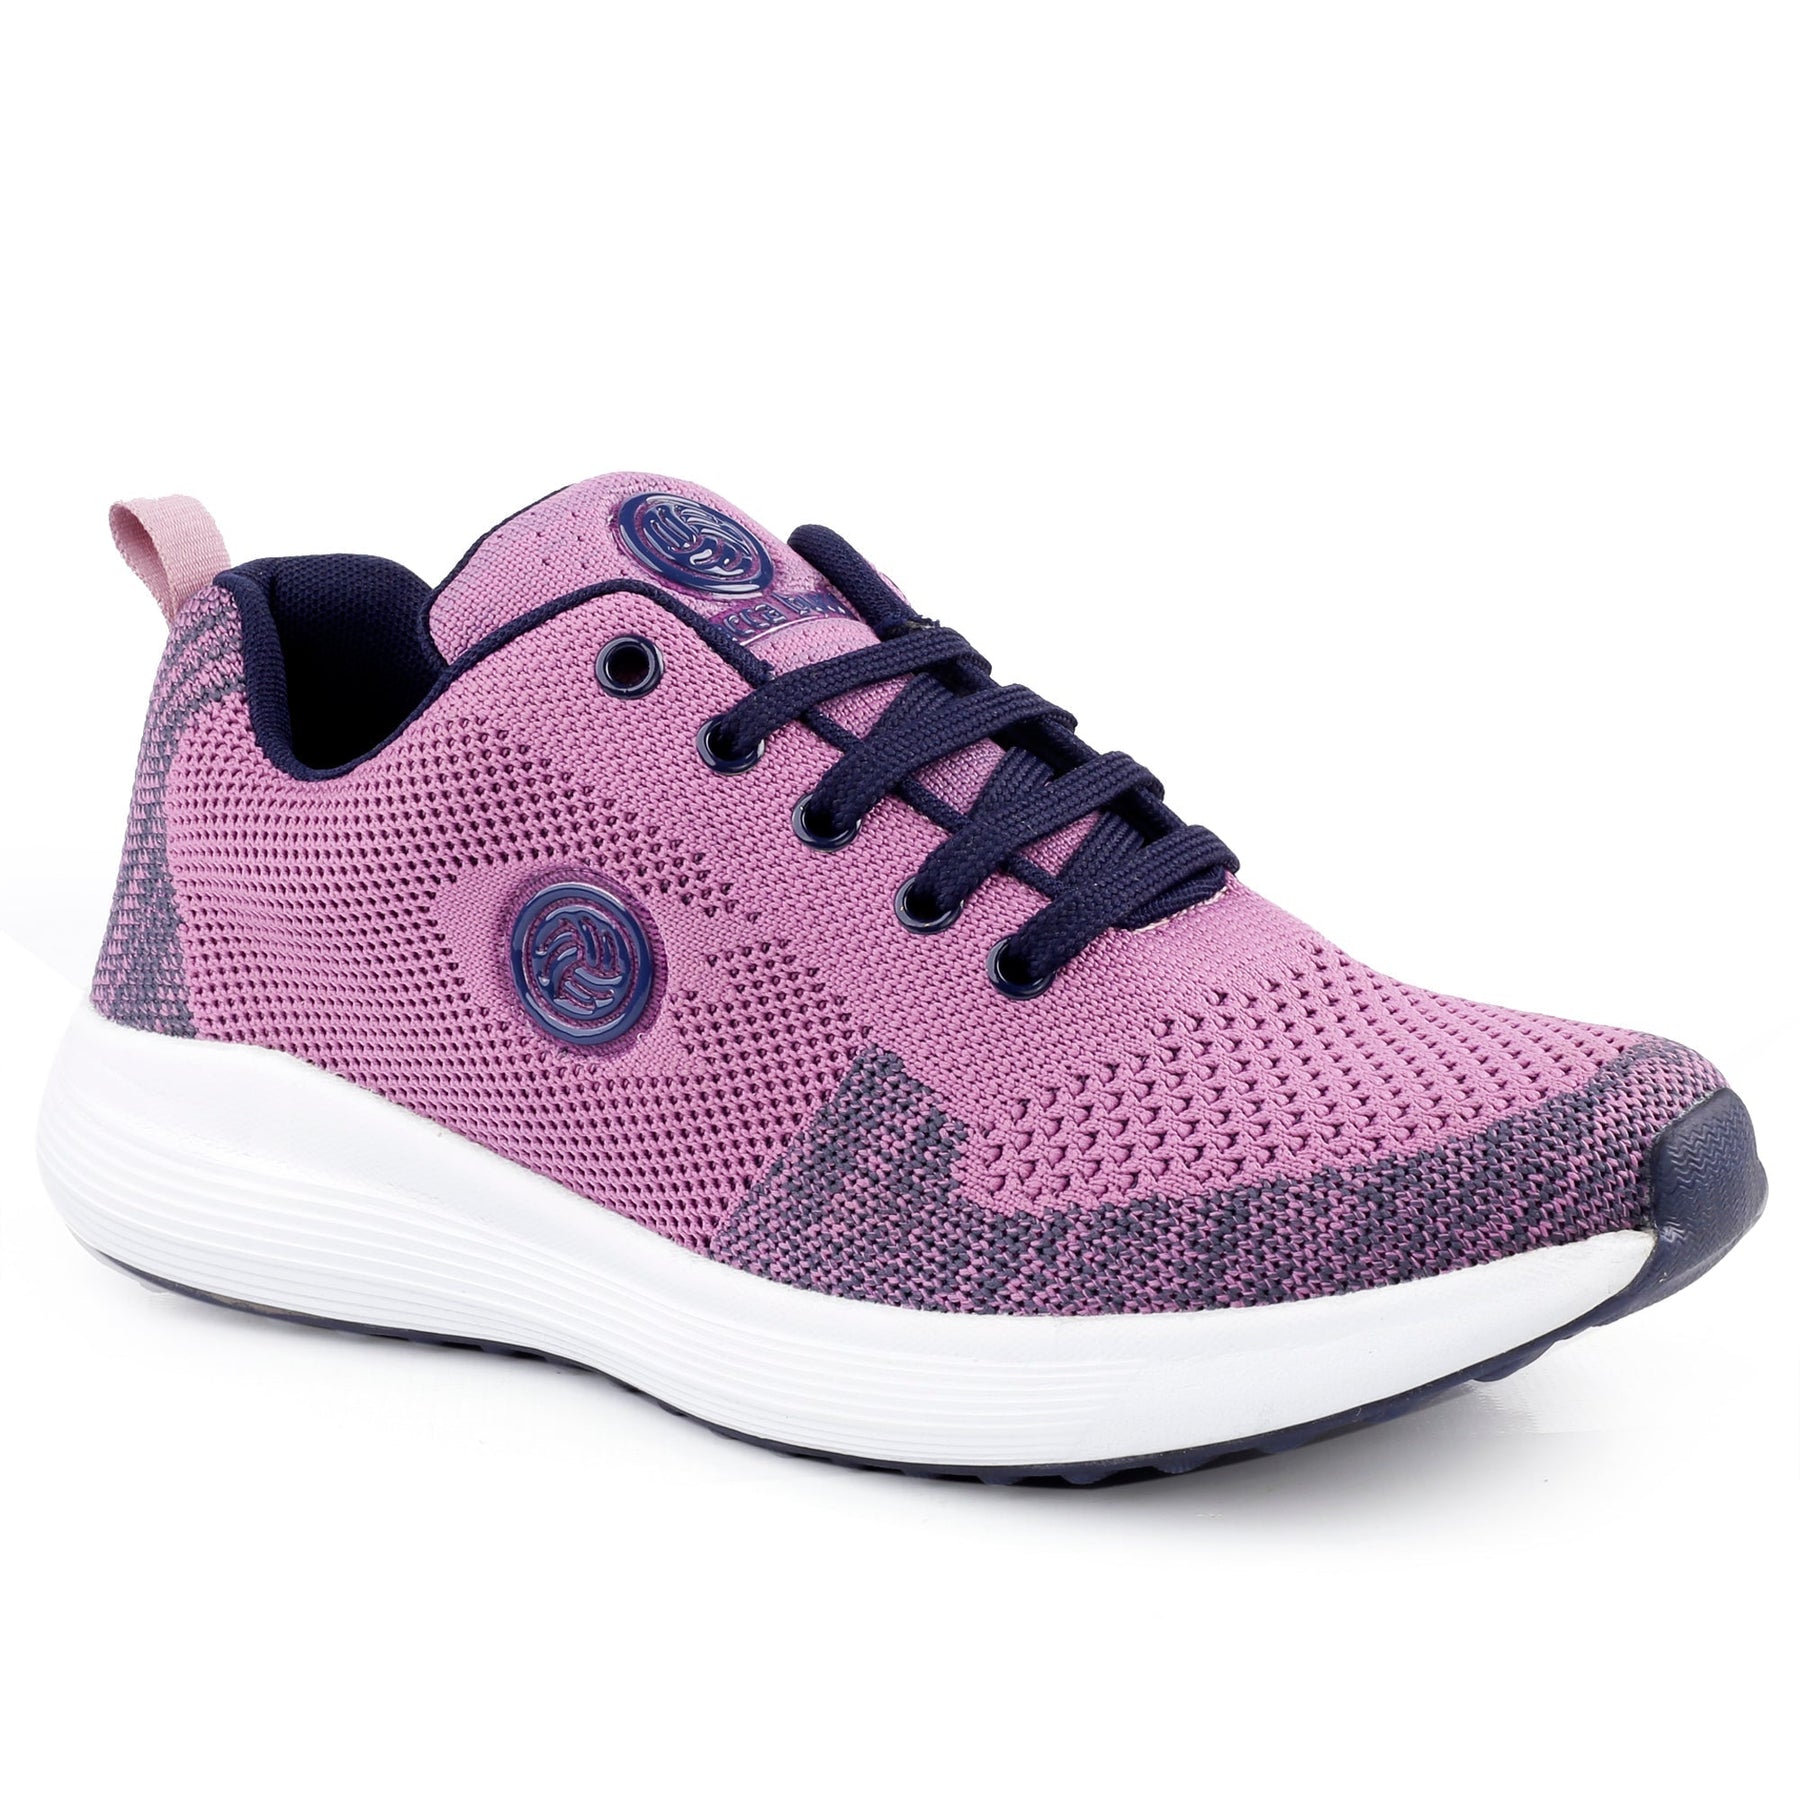 casual shoes for women,  shoes for women, pink shoes for women, purple shoes for women